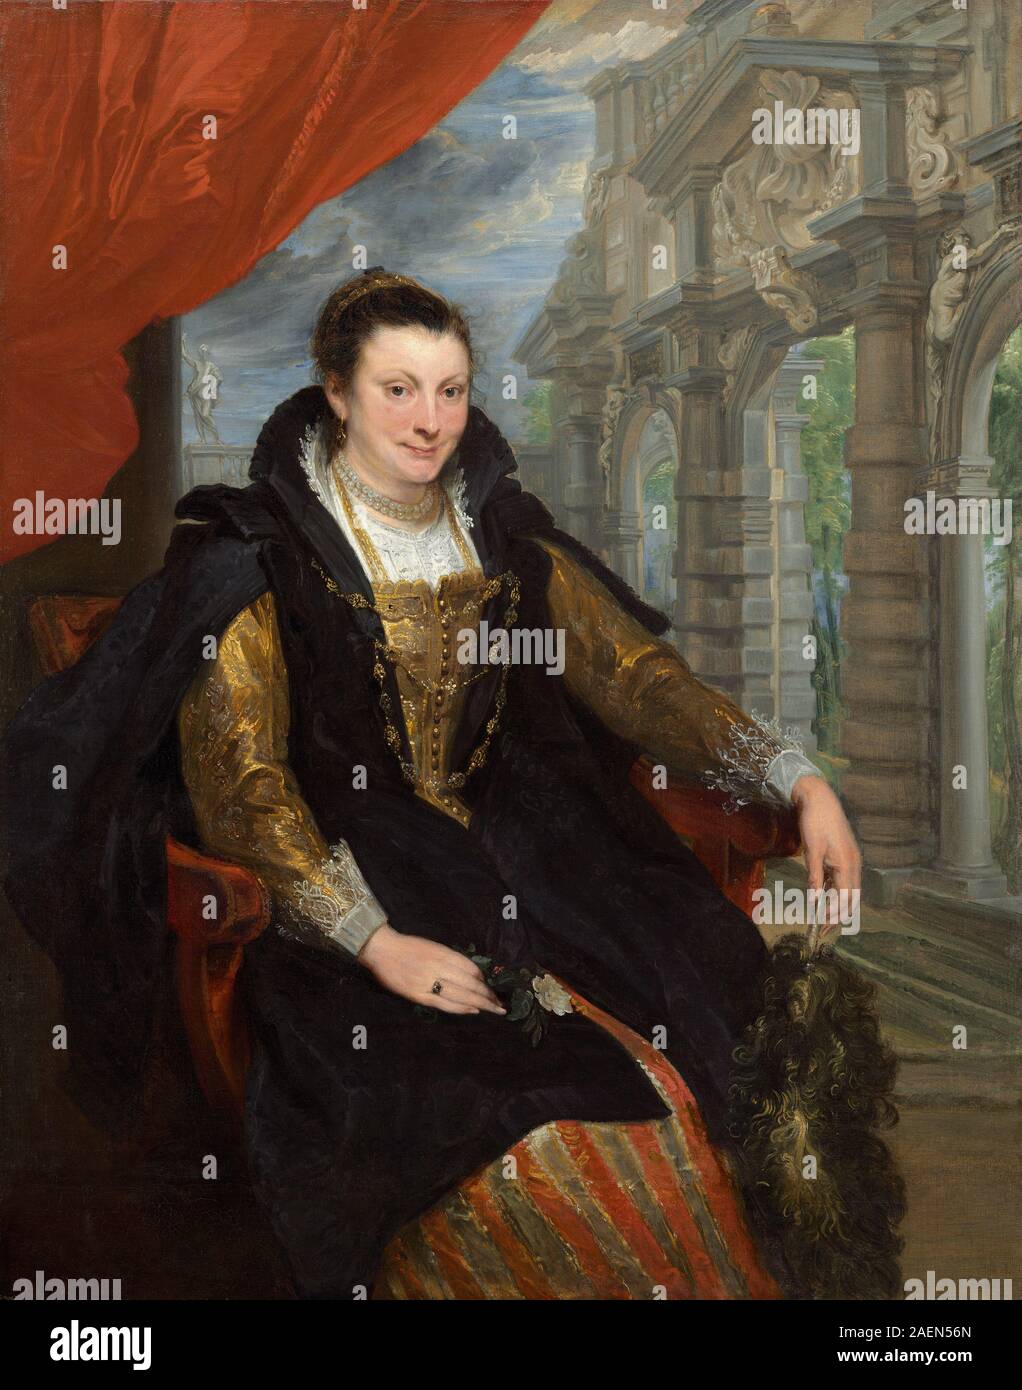 Sir Anthony Van Dyck, Isabella Brant, 1621, Sir Anthony Van Dyck (Flämisch, 1599 - 1641), Isabella Brant, 1621, Öl auf Leinwand, Andrew W. Mellon Collection 1937.1.47 Stockfoto